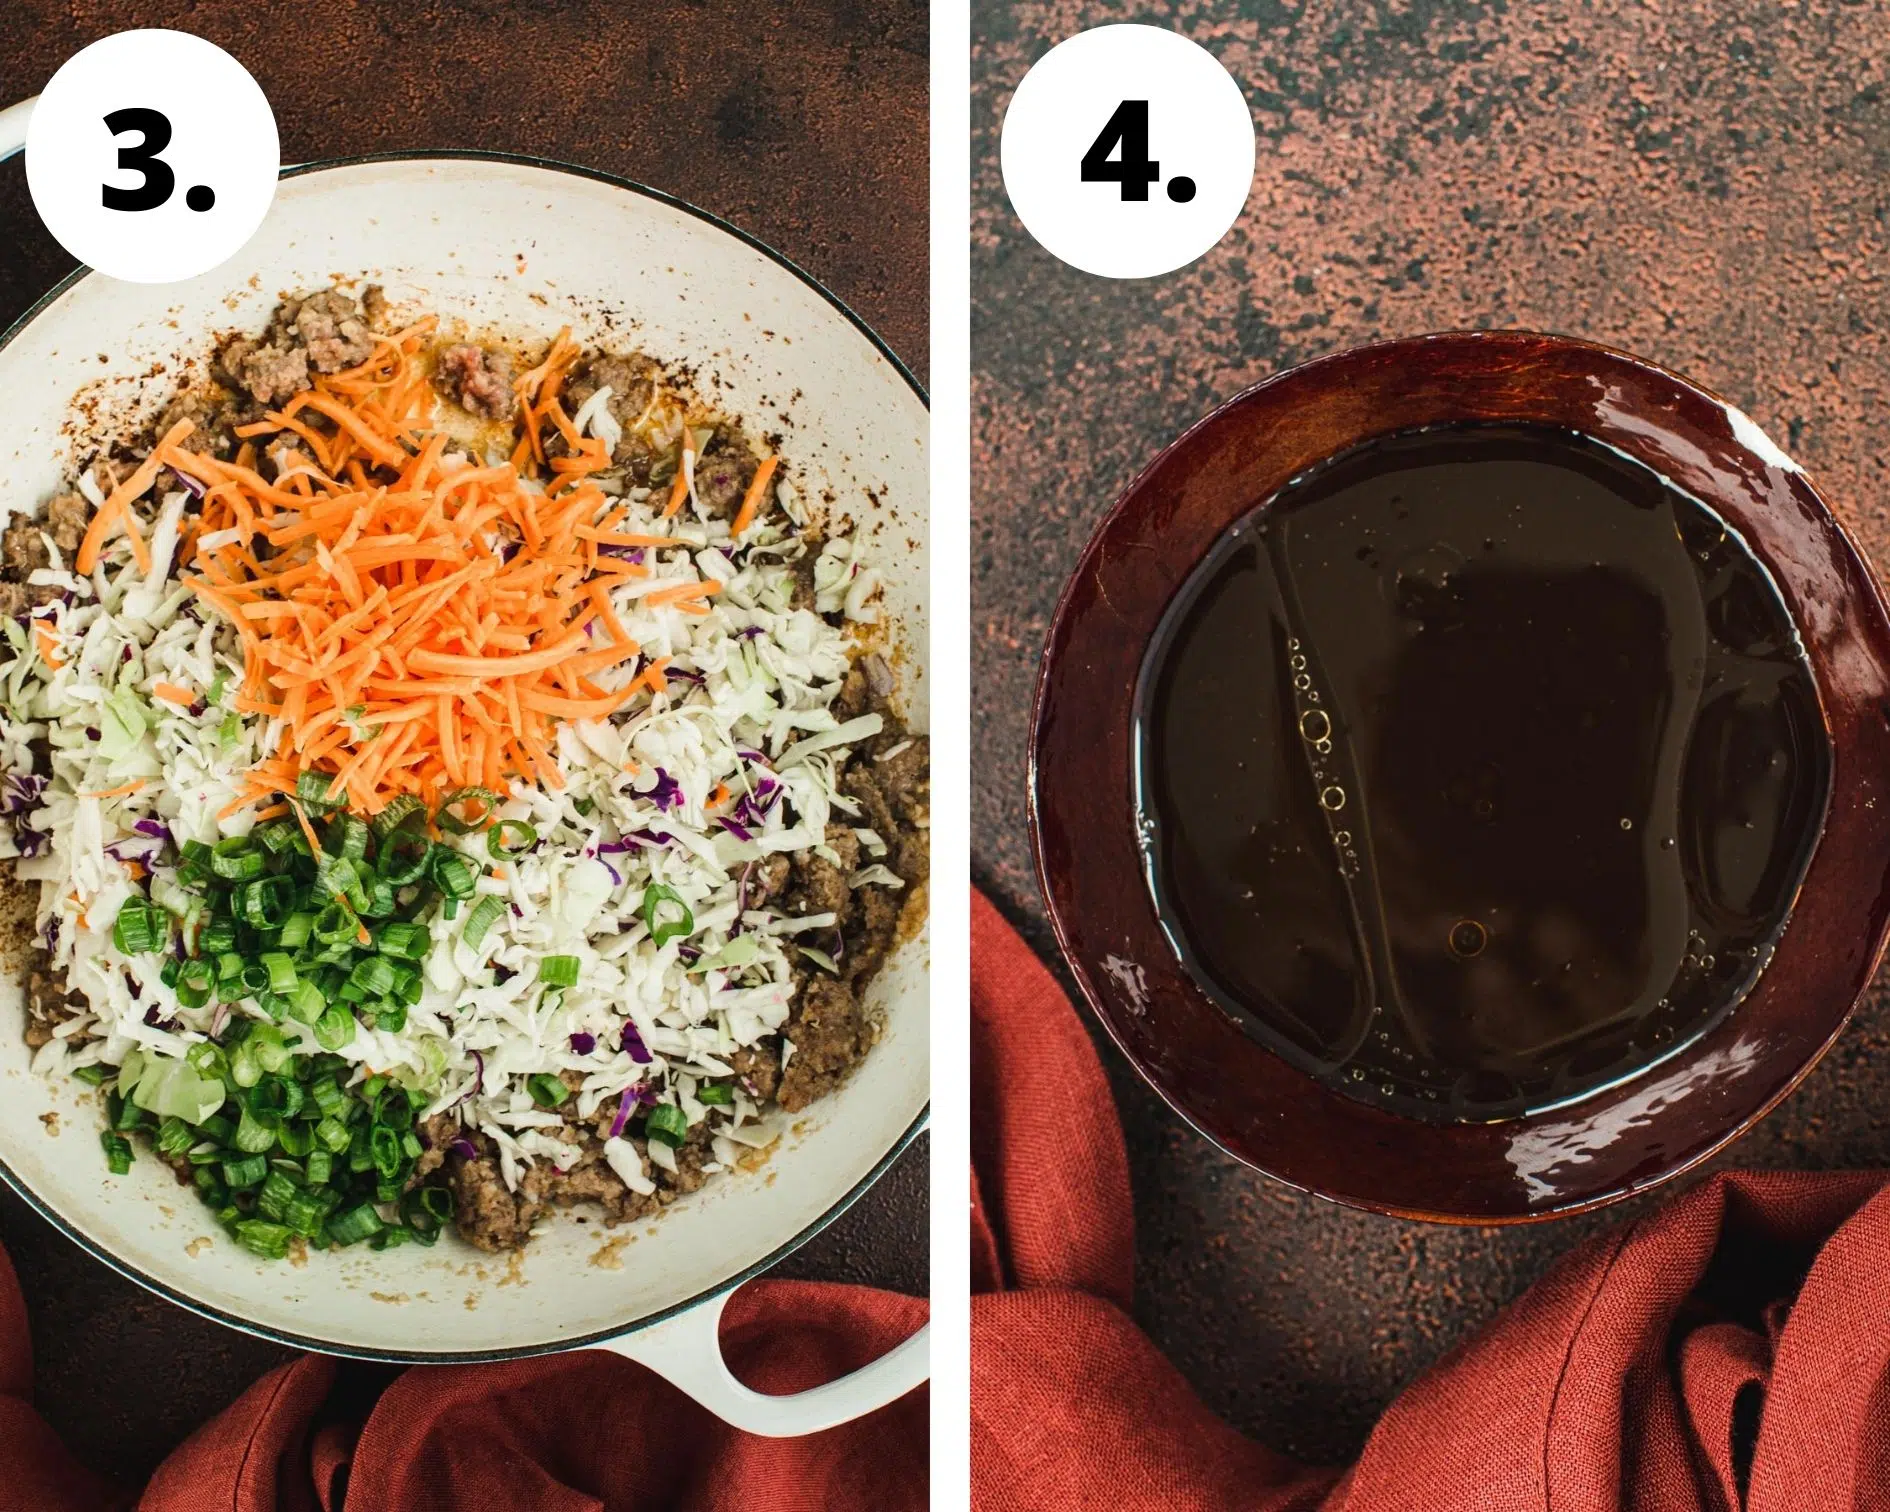 Egg roll in a bowl process steps 3 and 4.